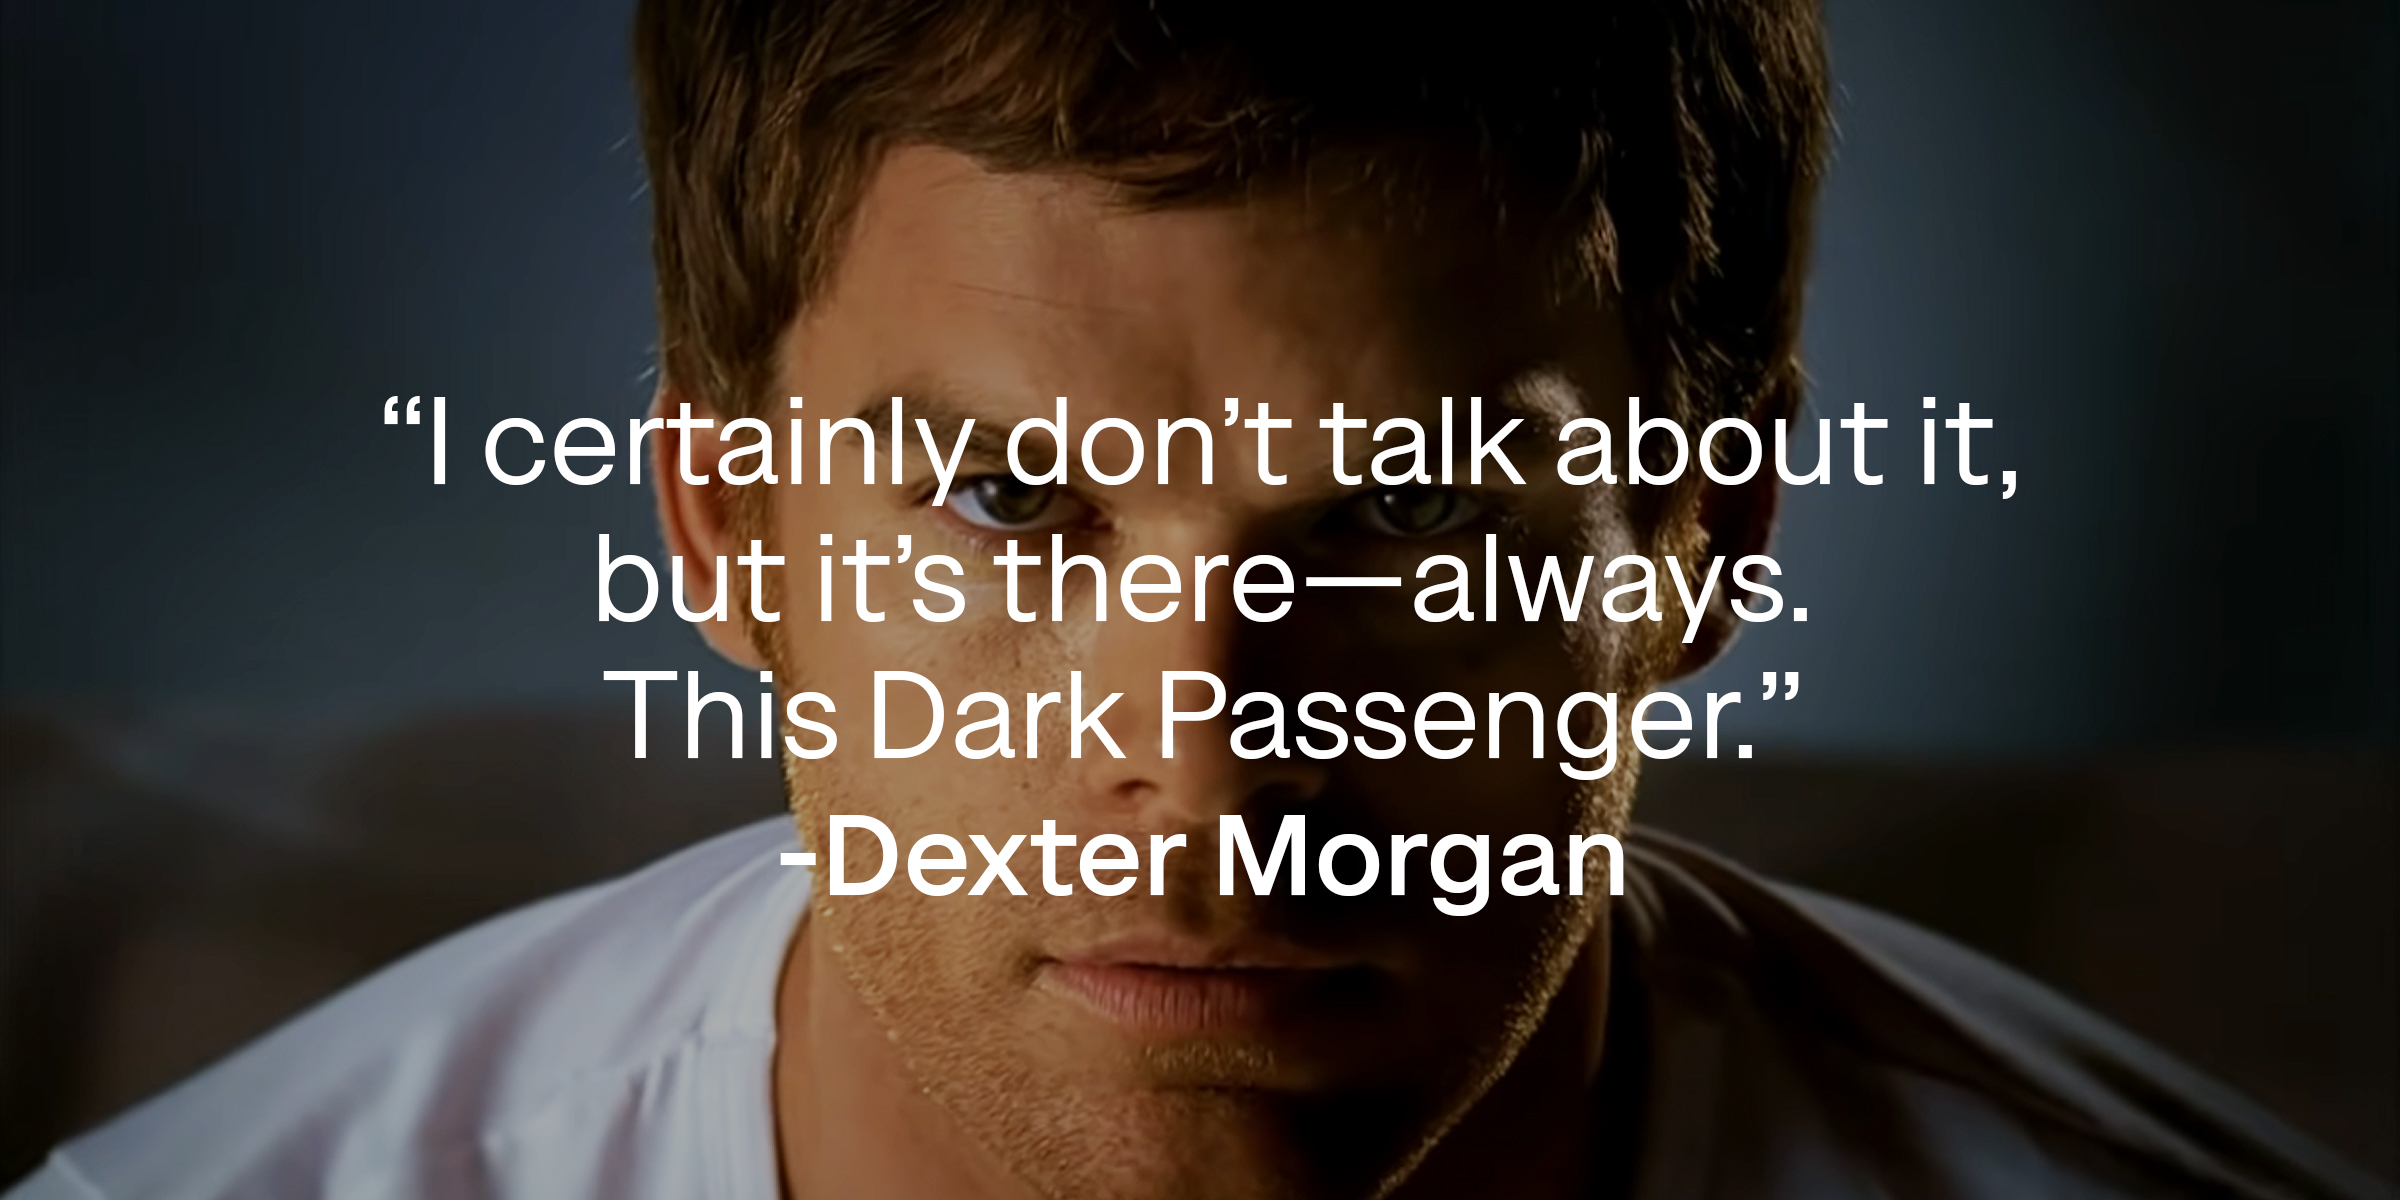 Dexter Morgan, with his quote: “I certainly don’t talk about it, but it’s there—always. This Dark Passenger.” | Source: Showtime